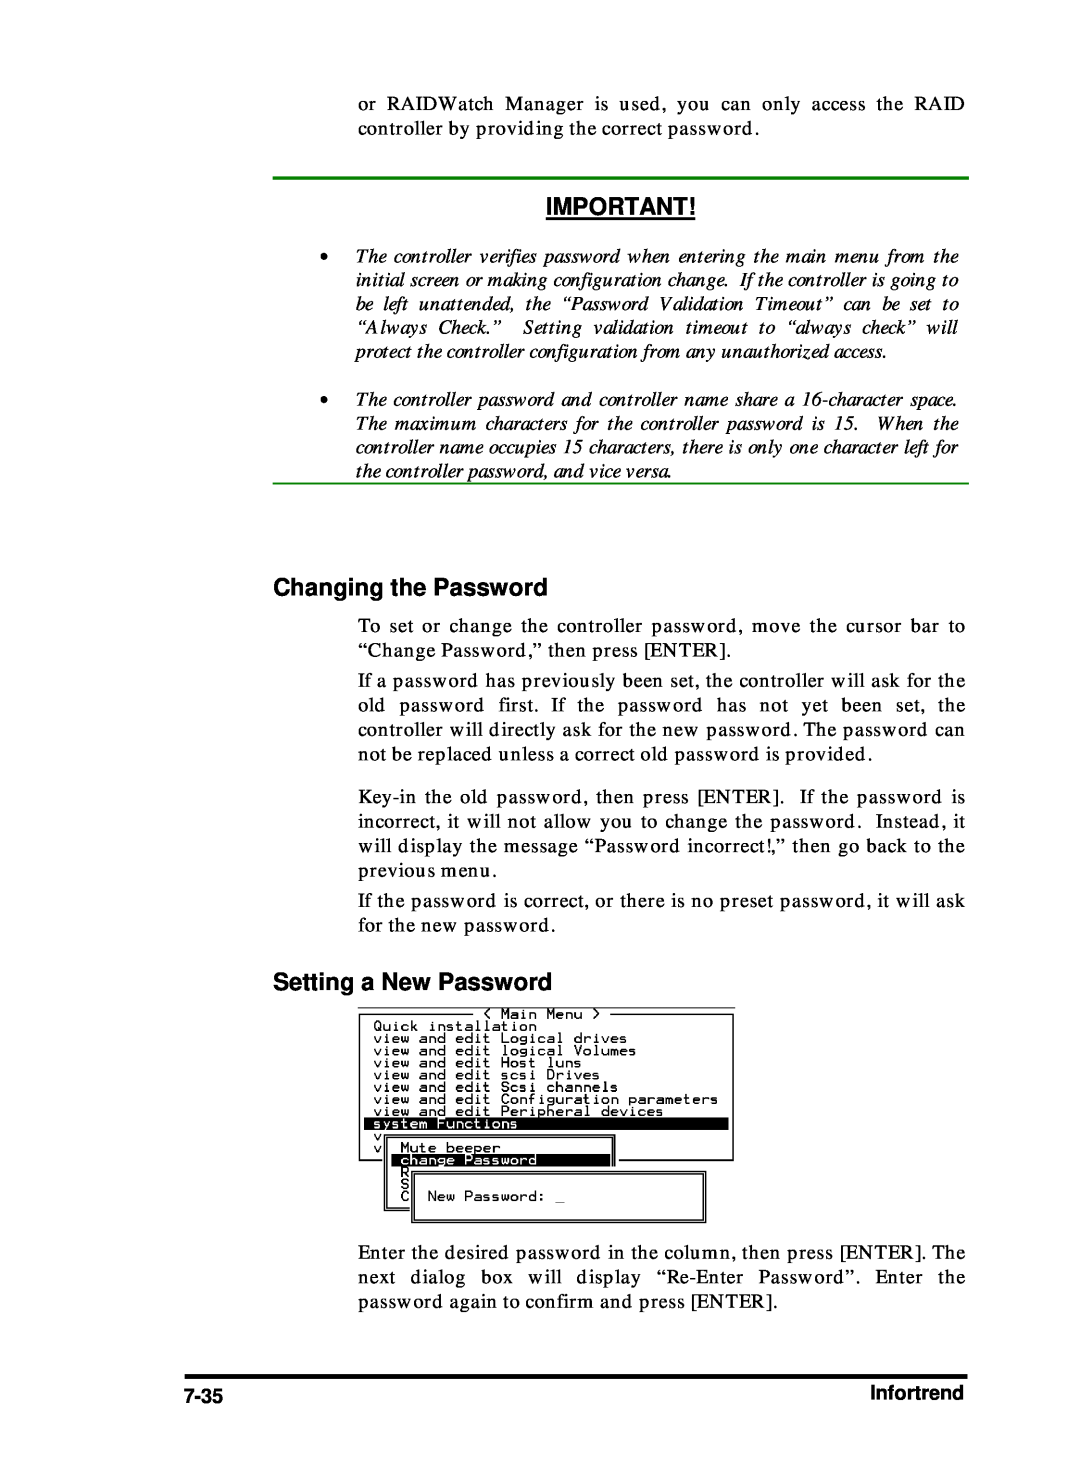 Compaq Infortrend manual Changing the Password, Setting a New Password 